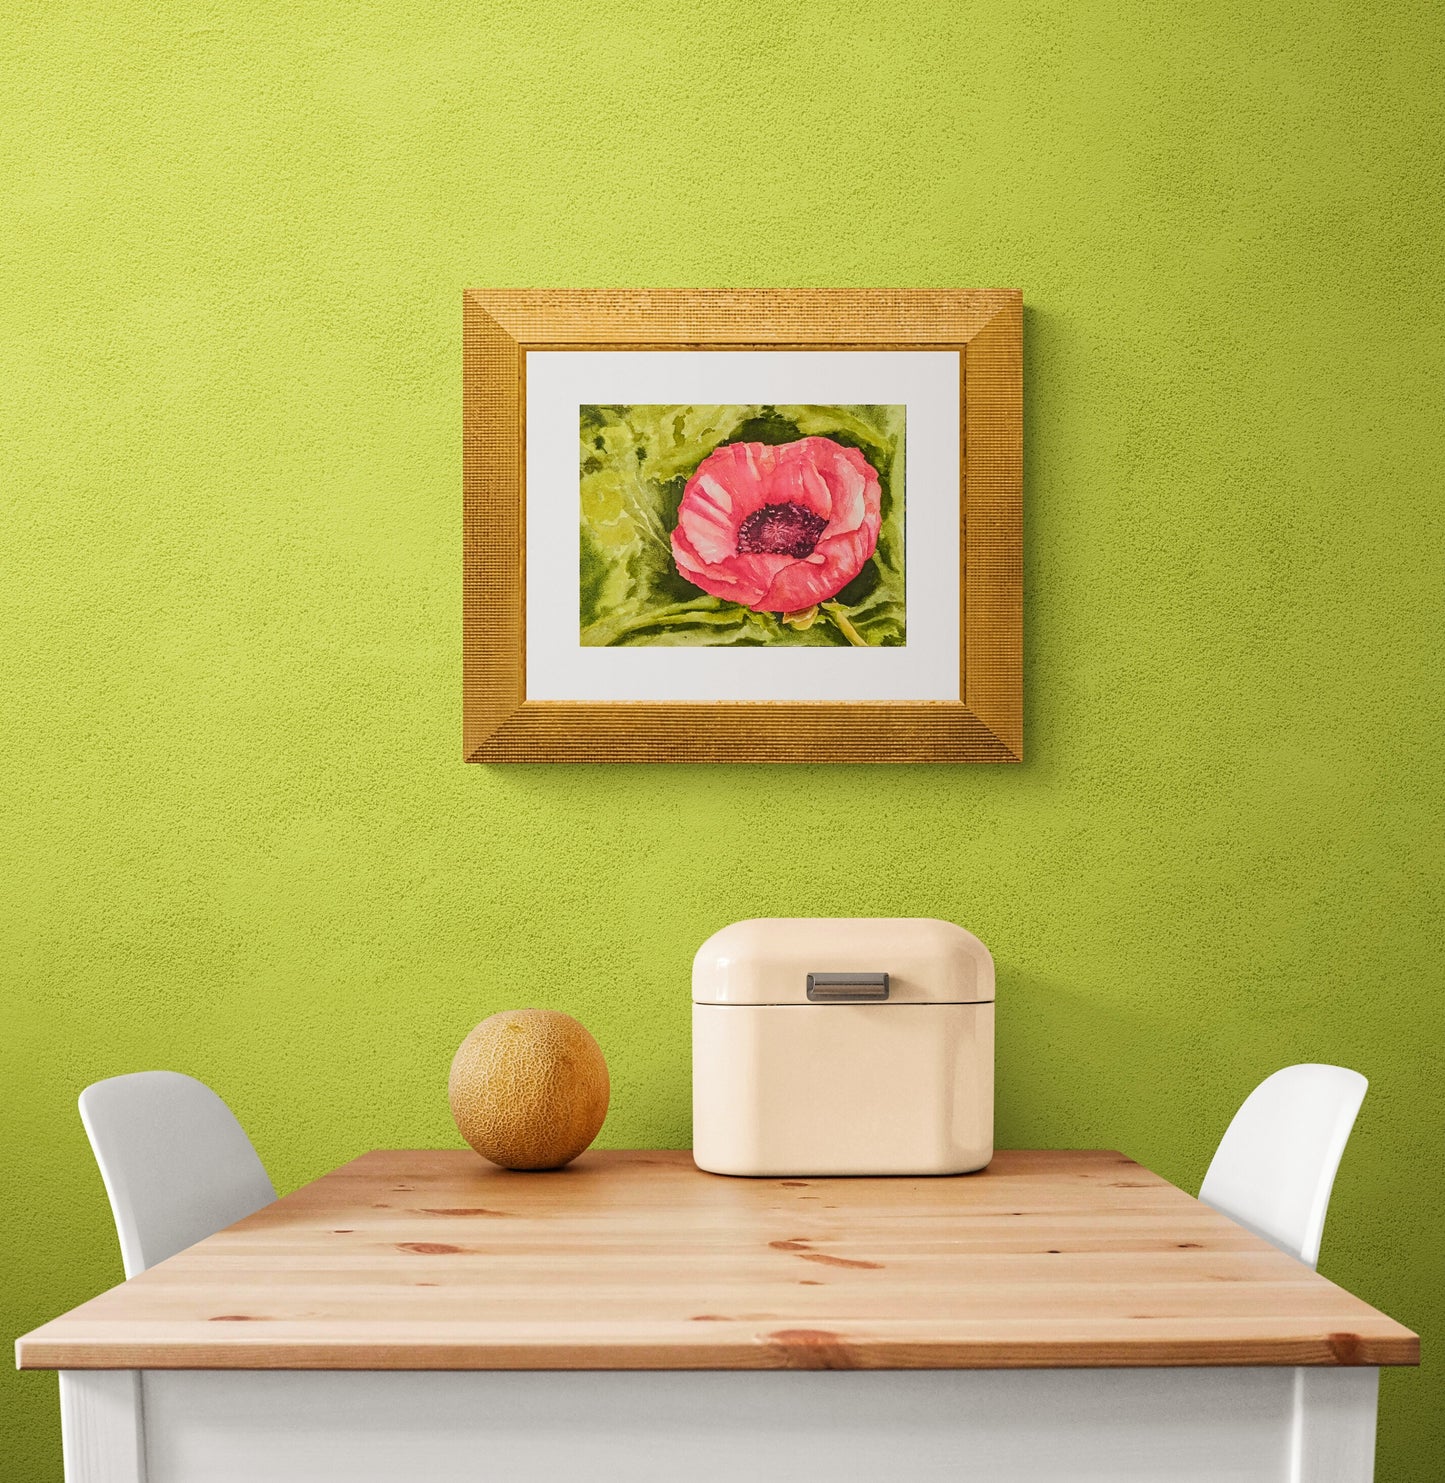 Coral Poppy bright watercolor painting on grass green wall.